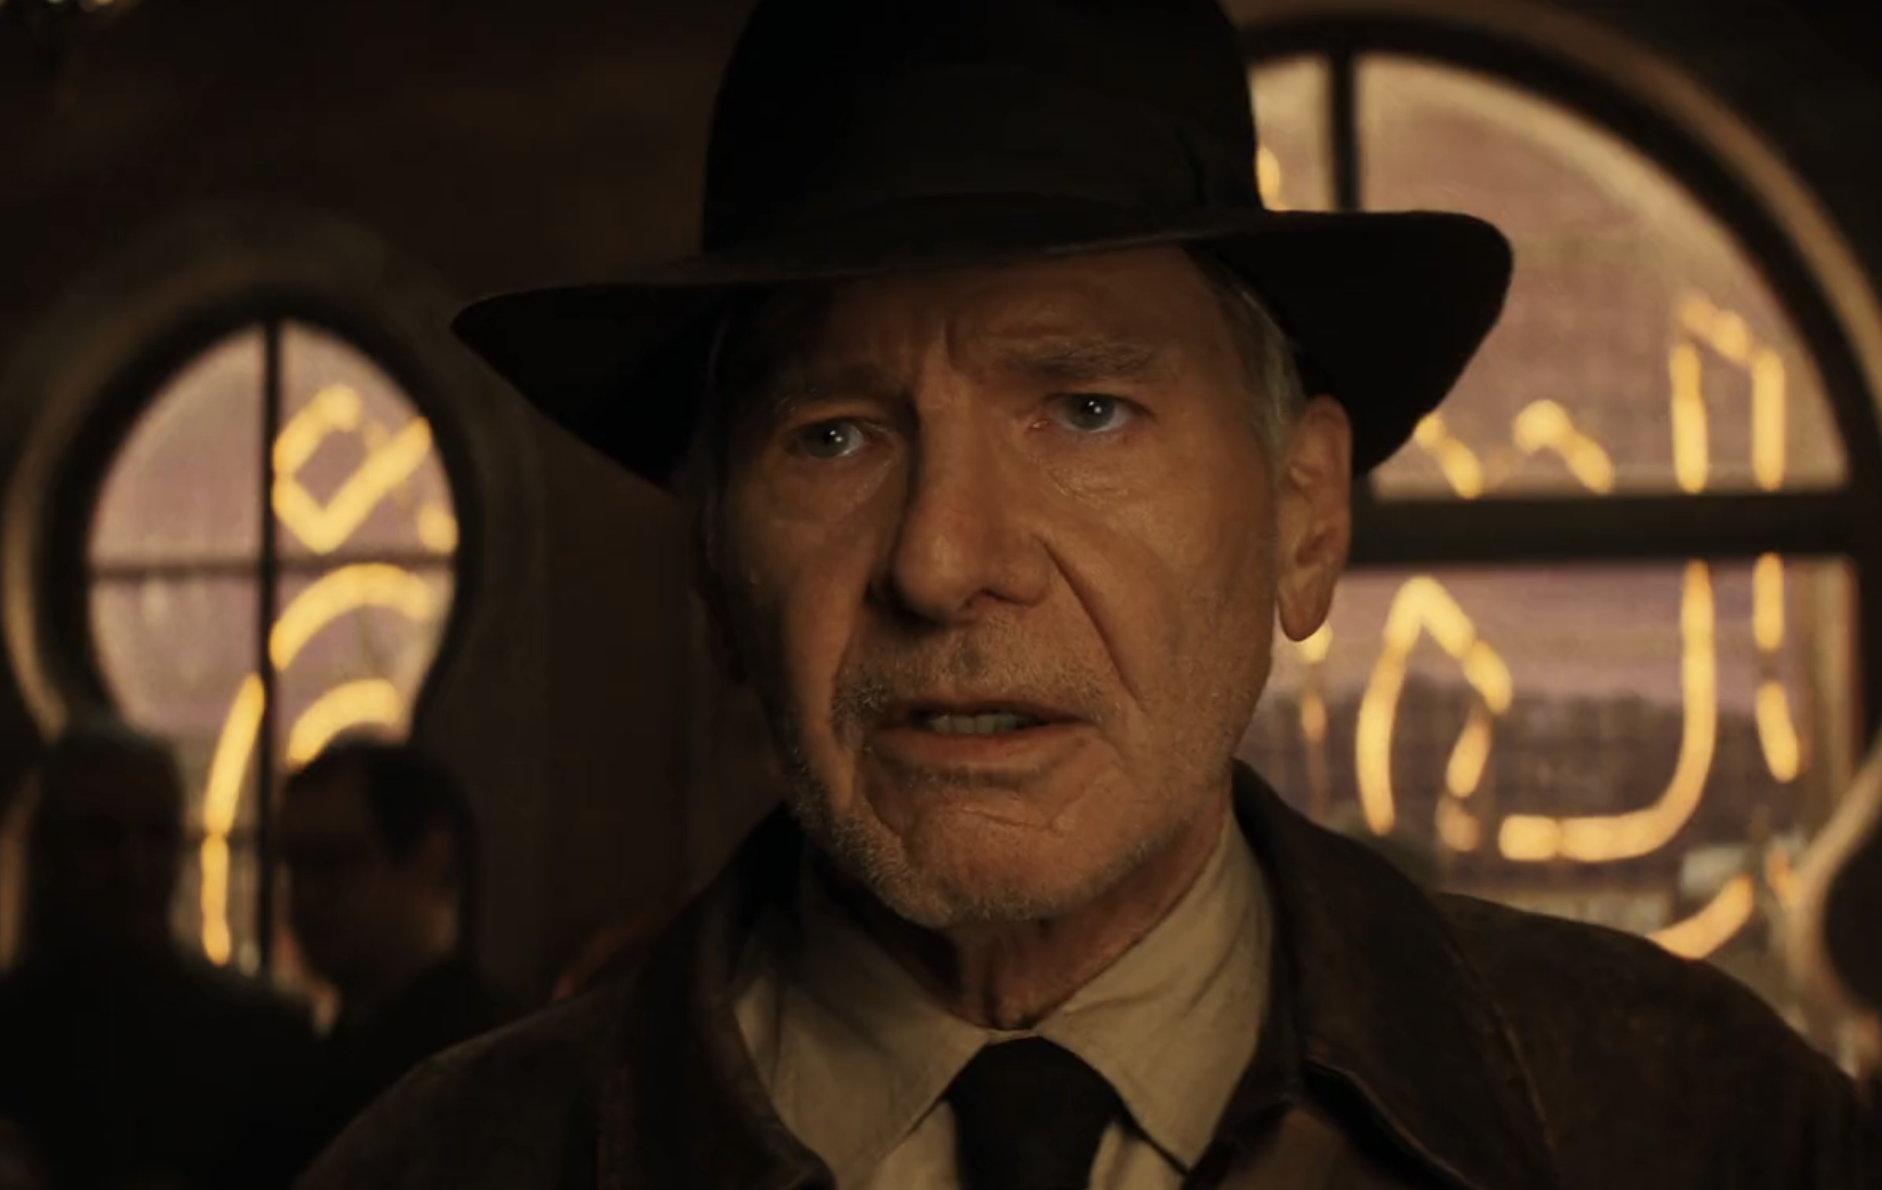 SEE IT: ‘Indiana Jones and the Dial of Destiny’ Super Bowl Spot Unveiled